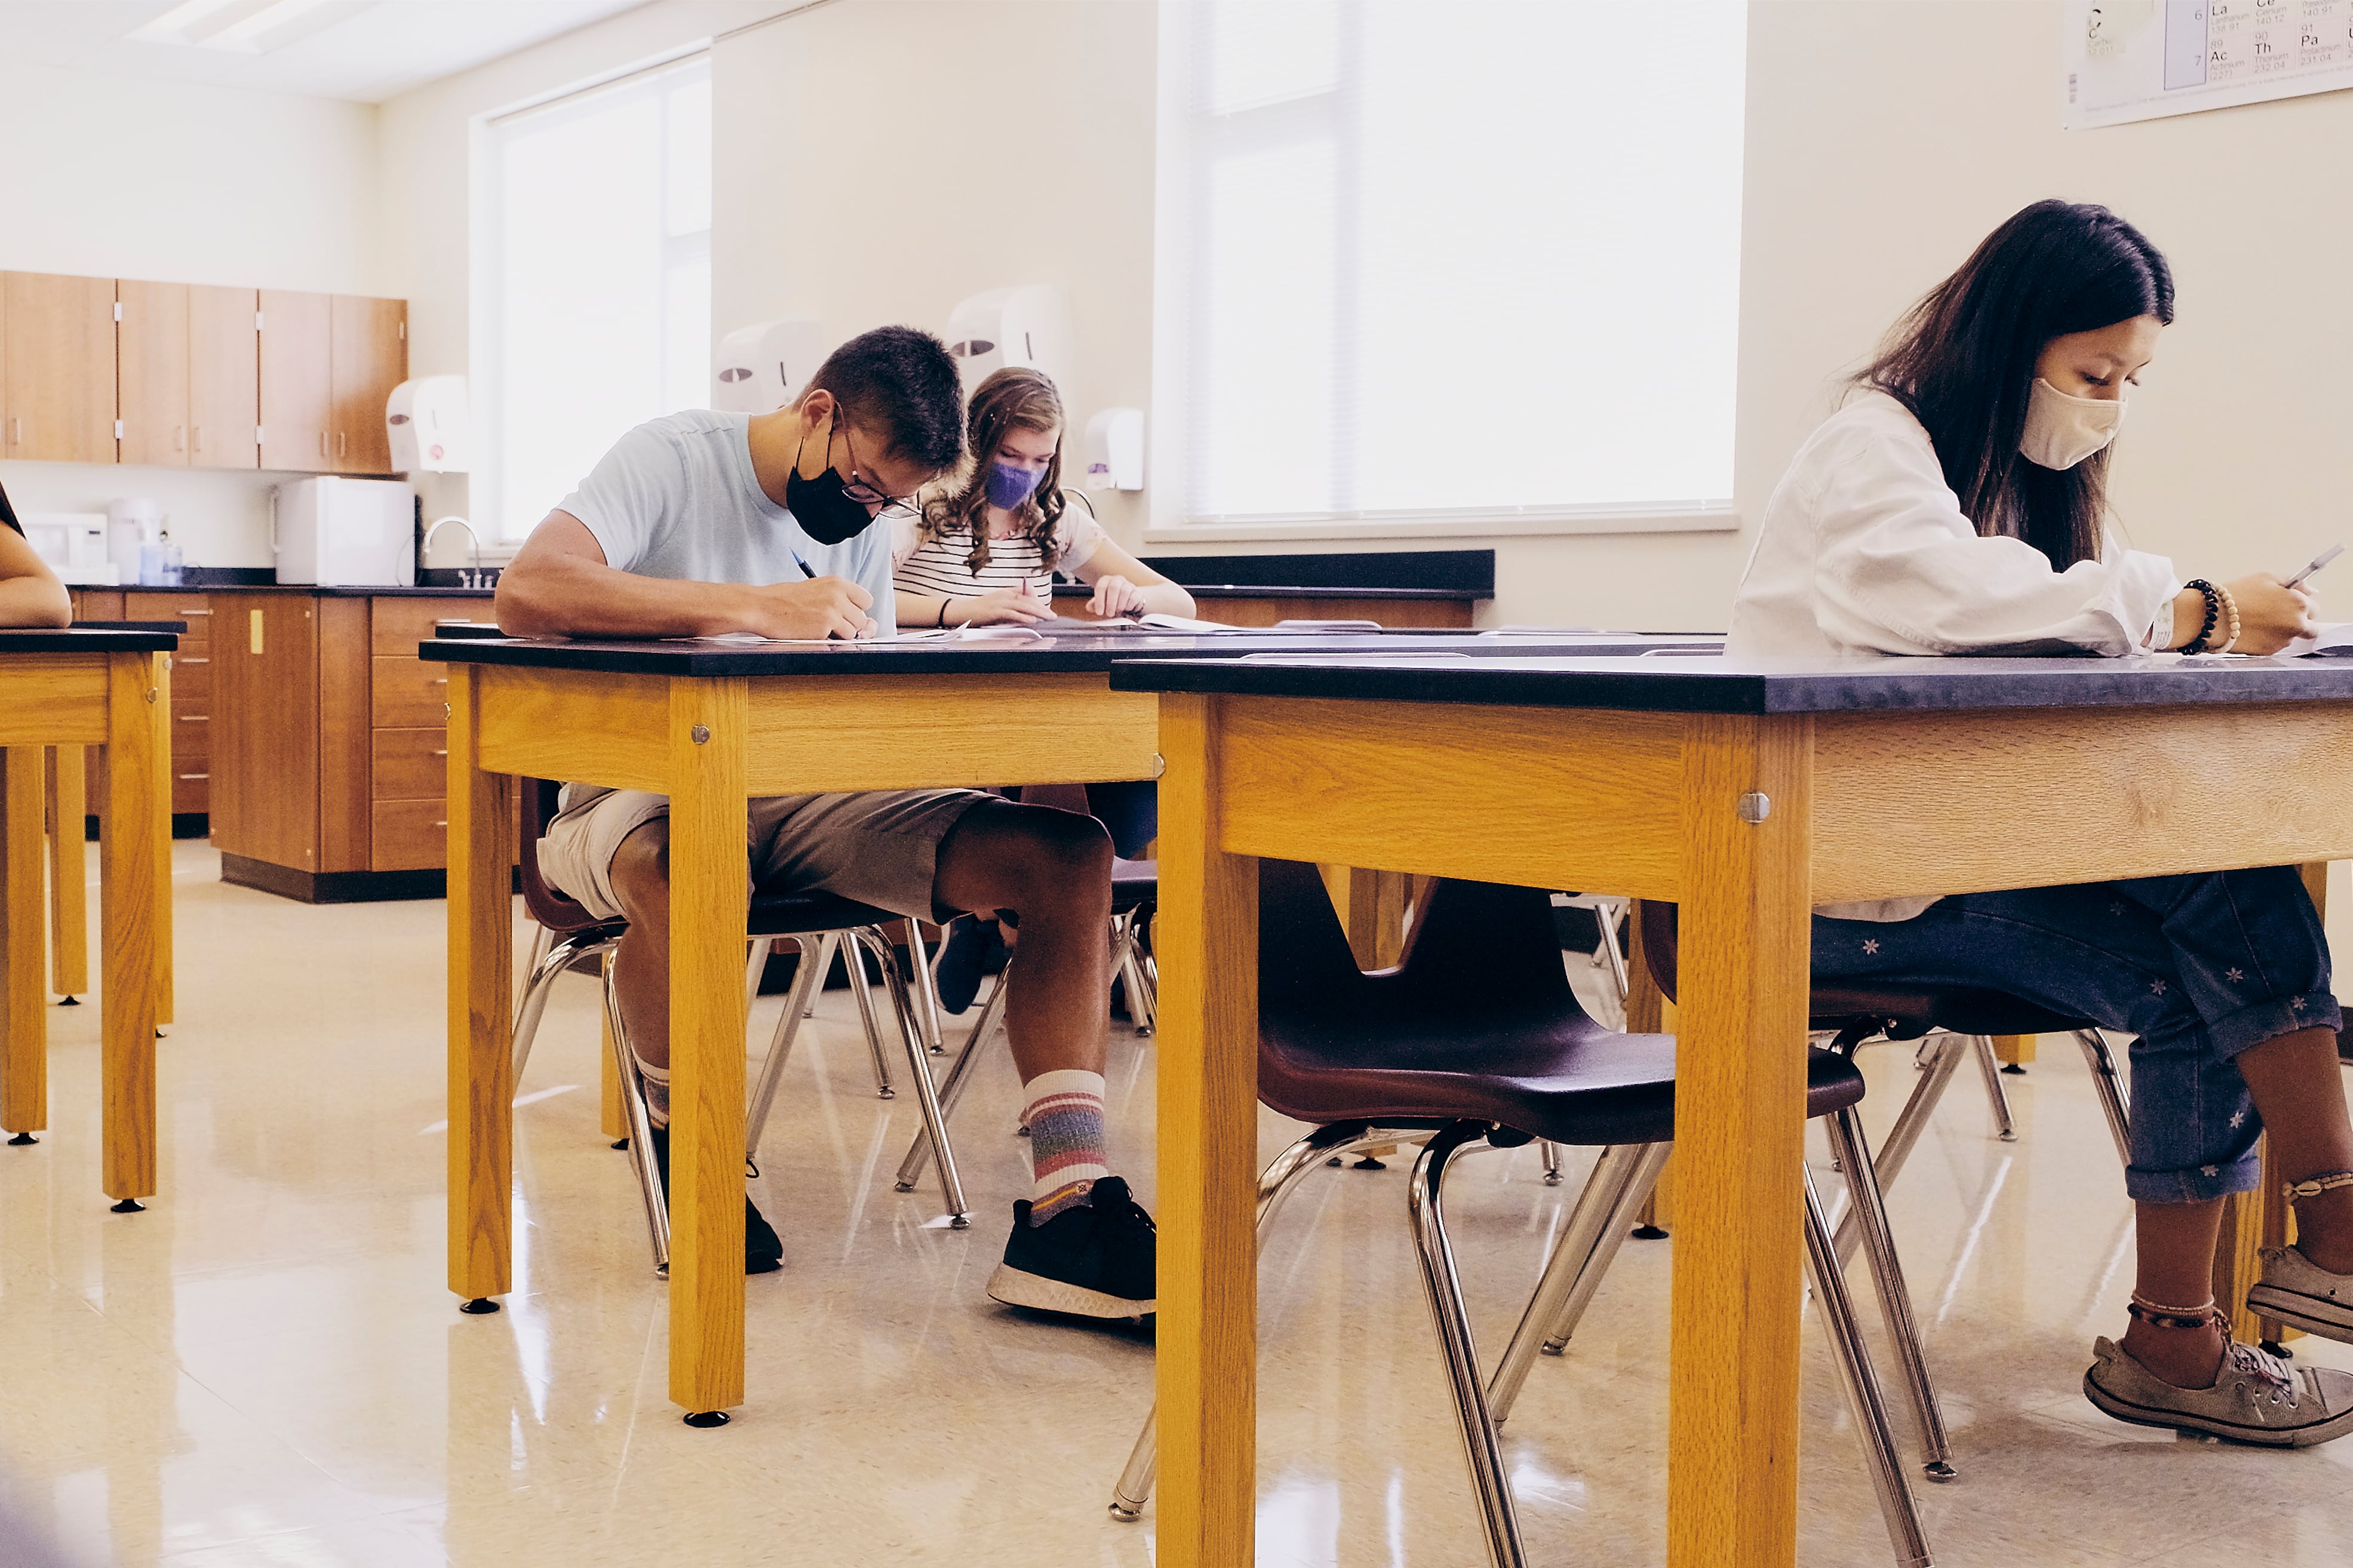 High school students wearing masks sit several feet apart at desks in a classroom,